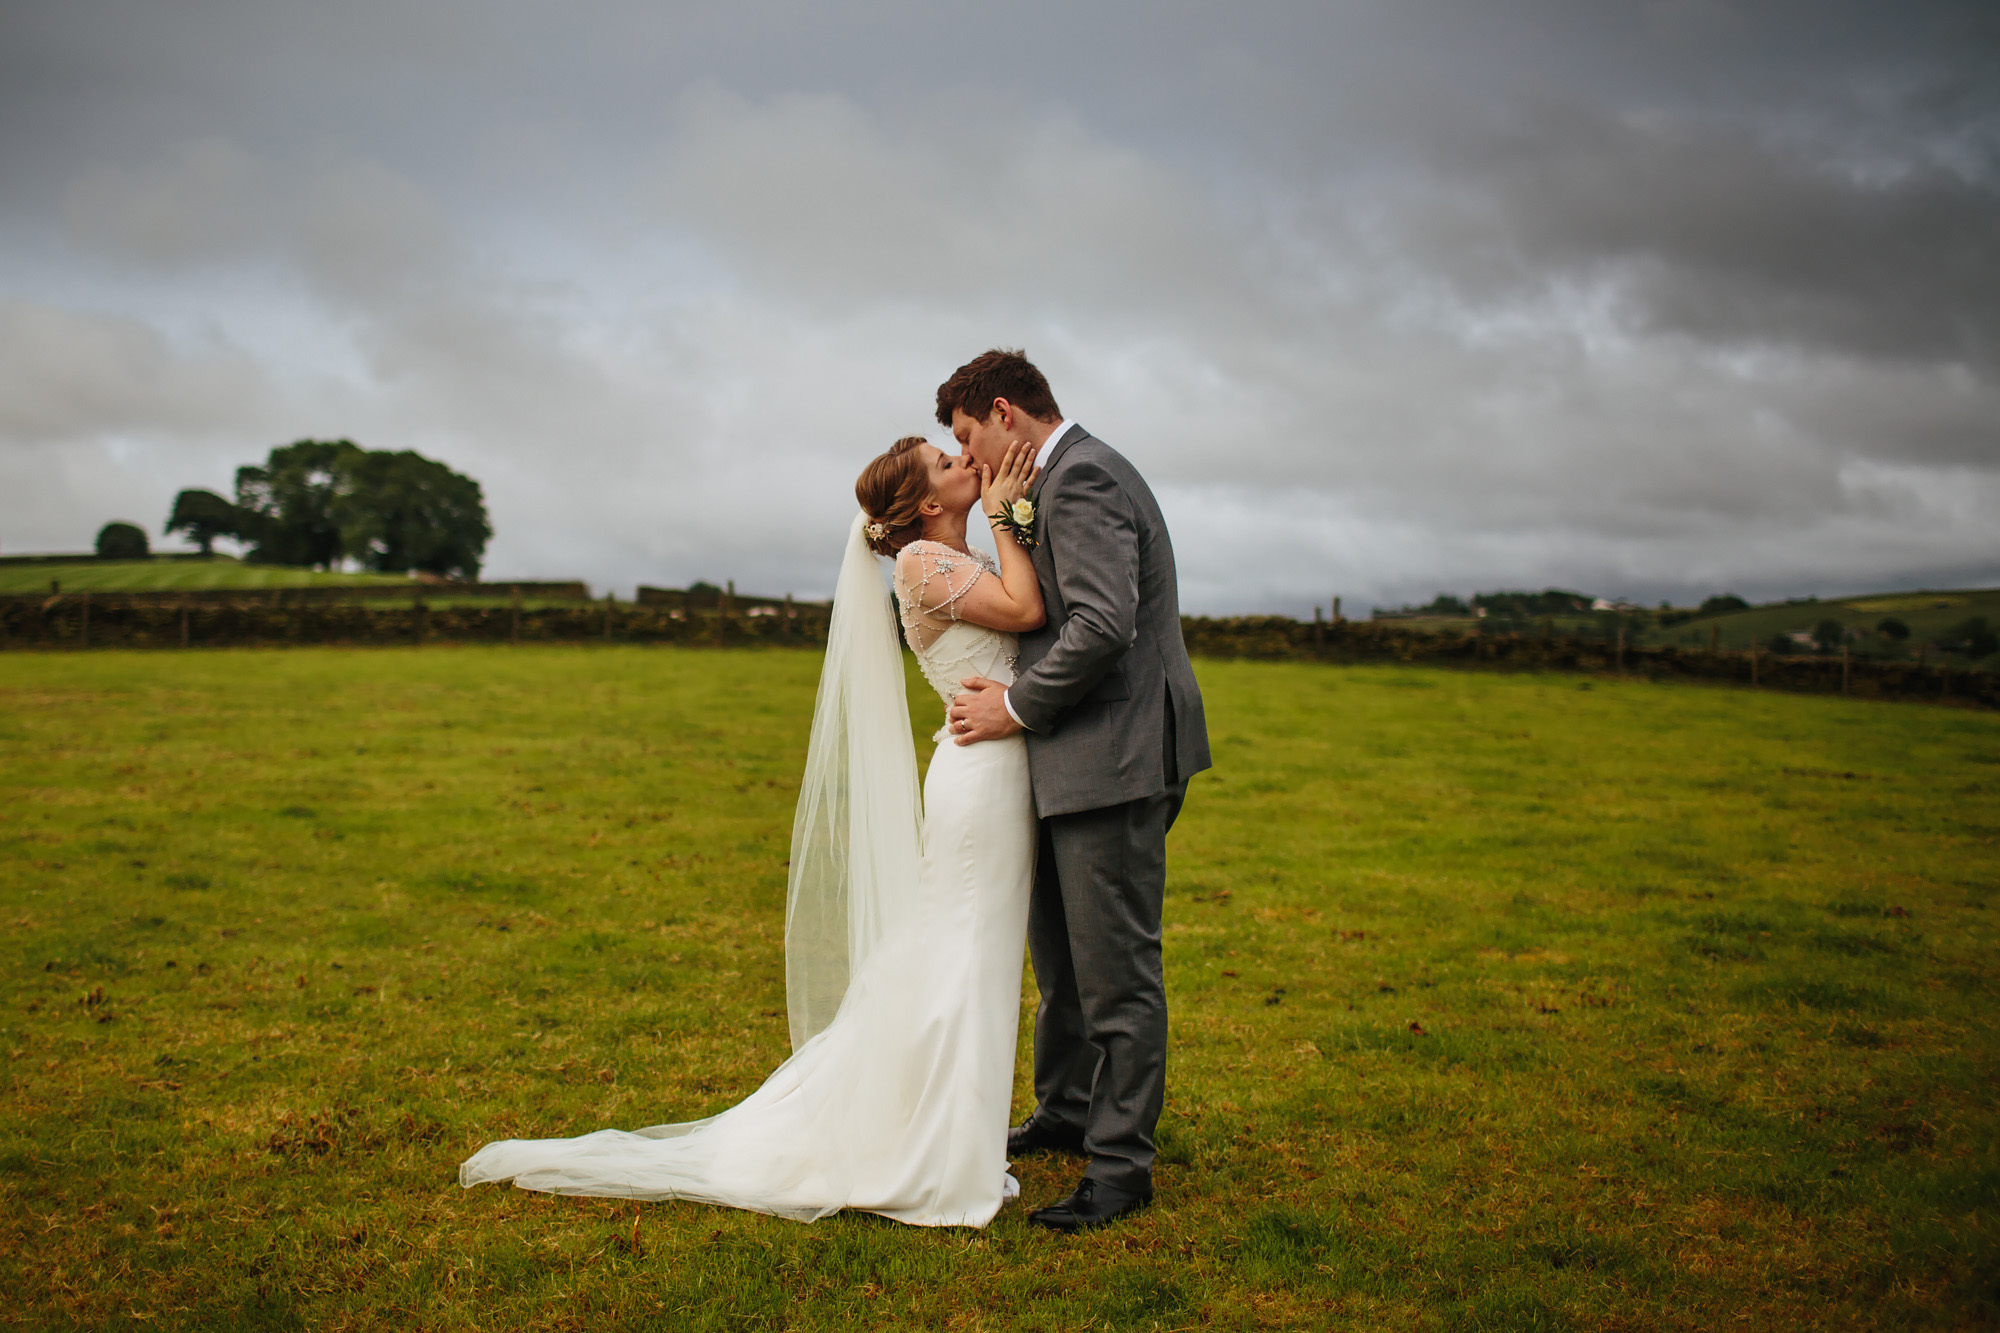 Bride and groom kissing on their wedding day in Lancashire